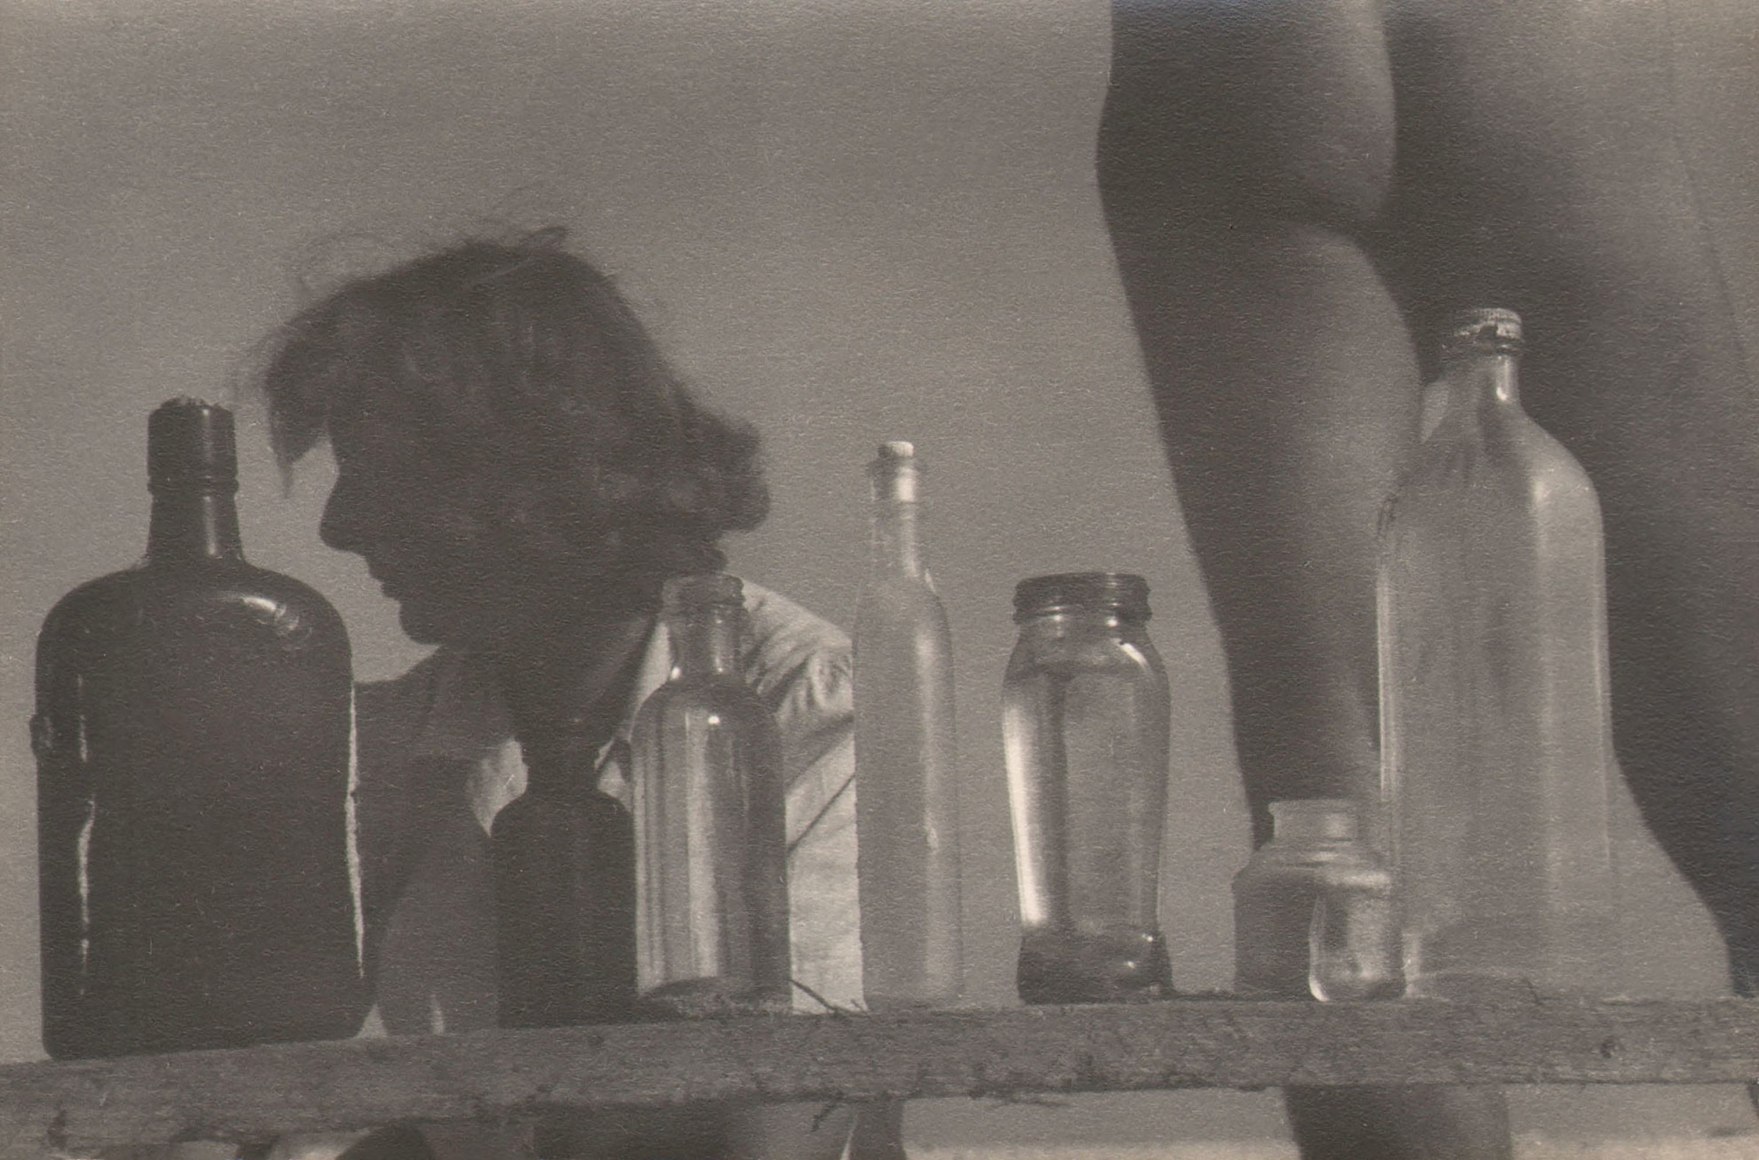 PaJaMa, Margaret French, Jared French, Fire Island, ​1945. A wooden plank extends across the lower frame with various glass bottles on it. The lower body of one nude figure, facing away, and the upper body of a woman facing left, are behind the bottles.